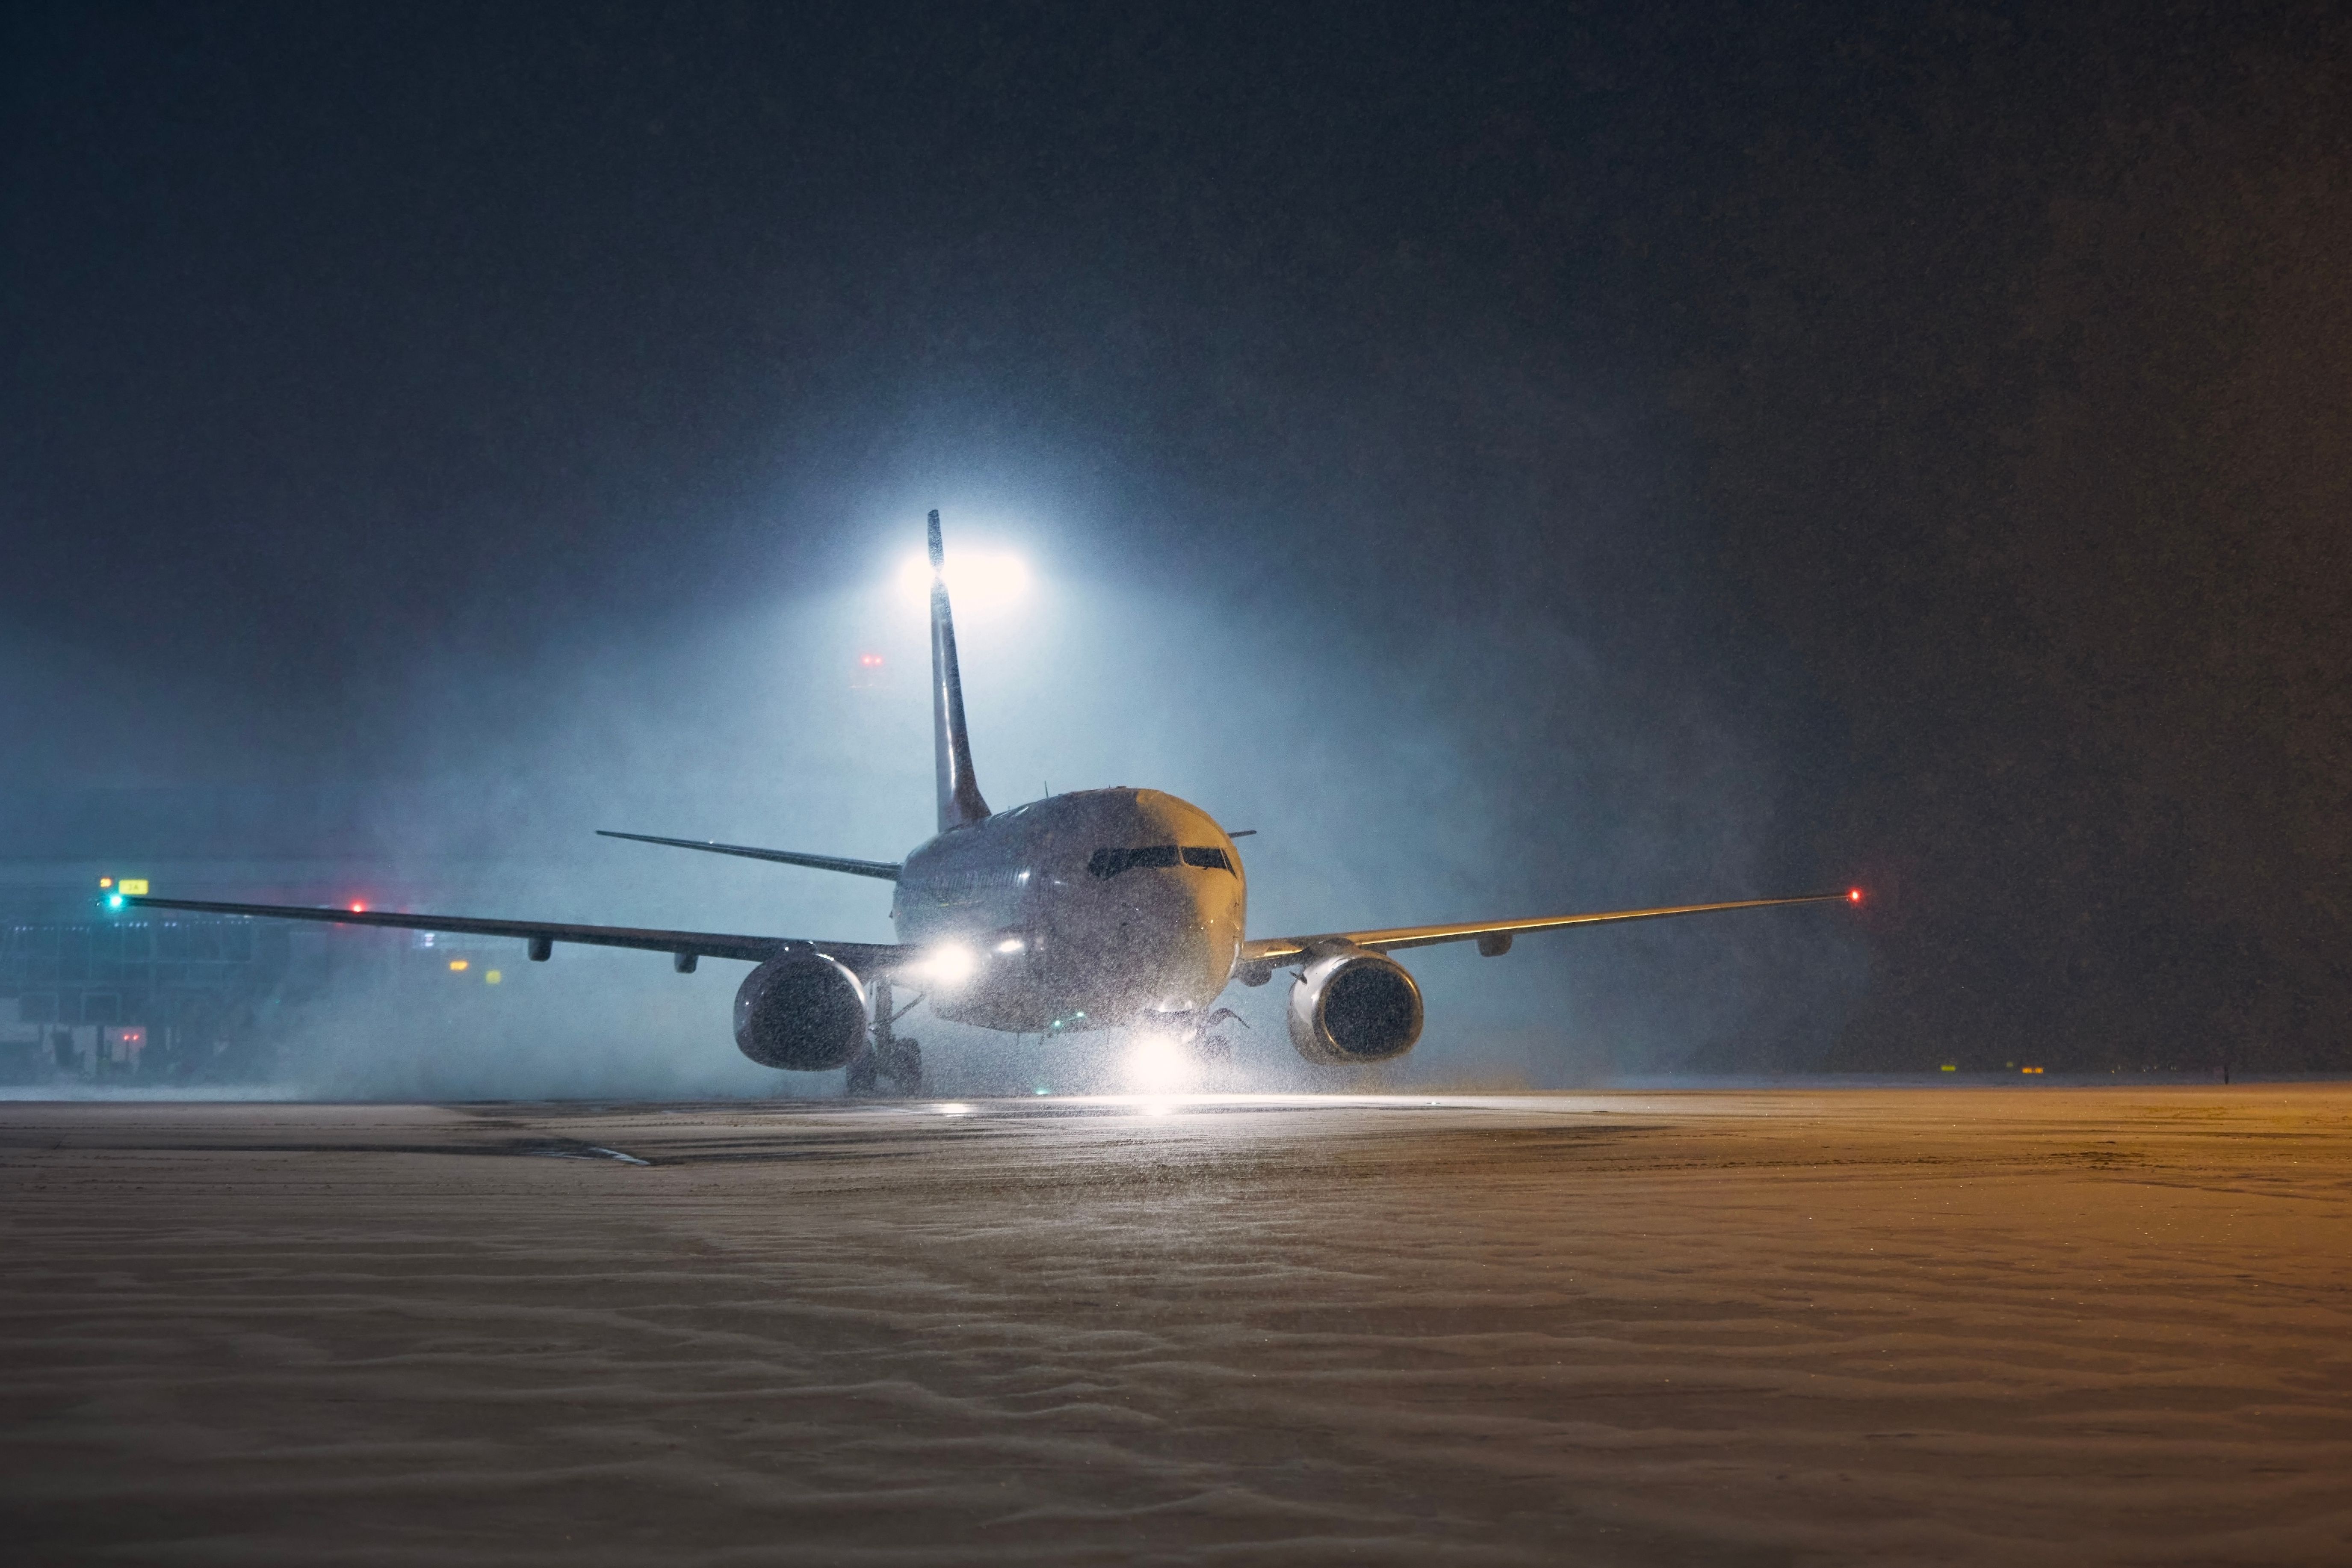 An aircraft in a runway during a snow storm 